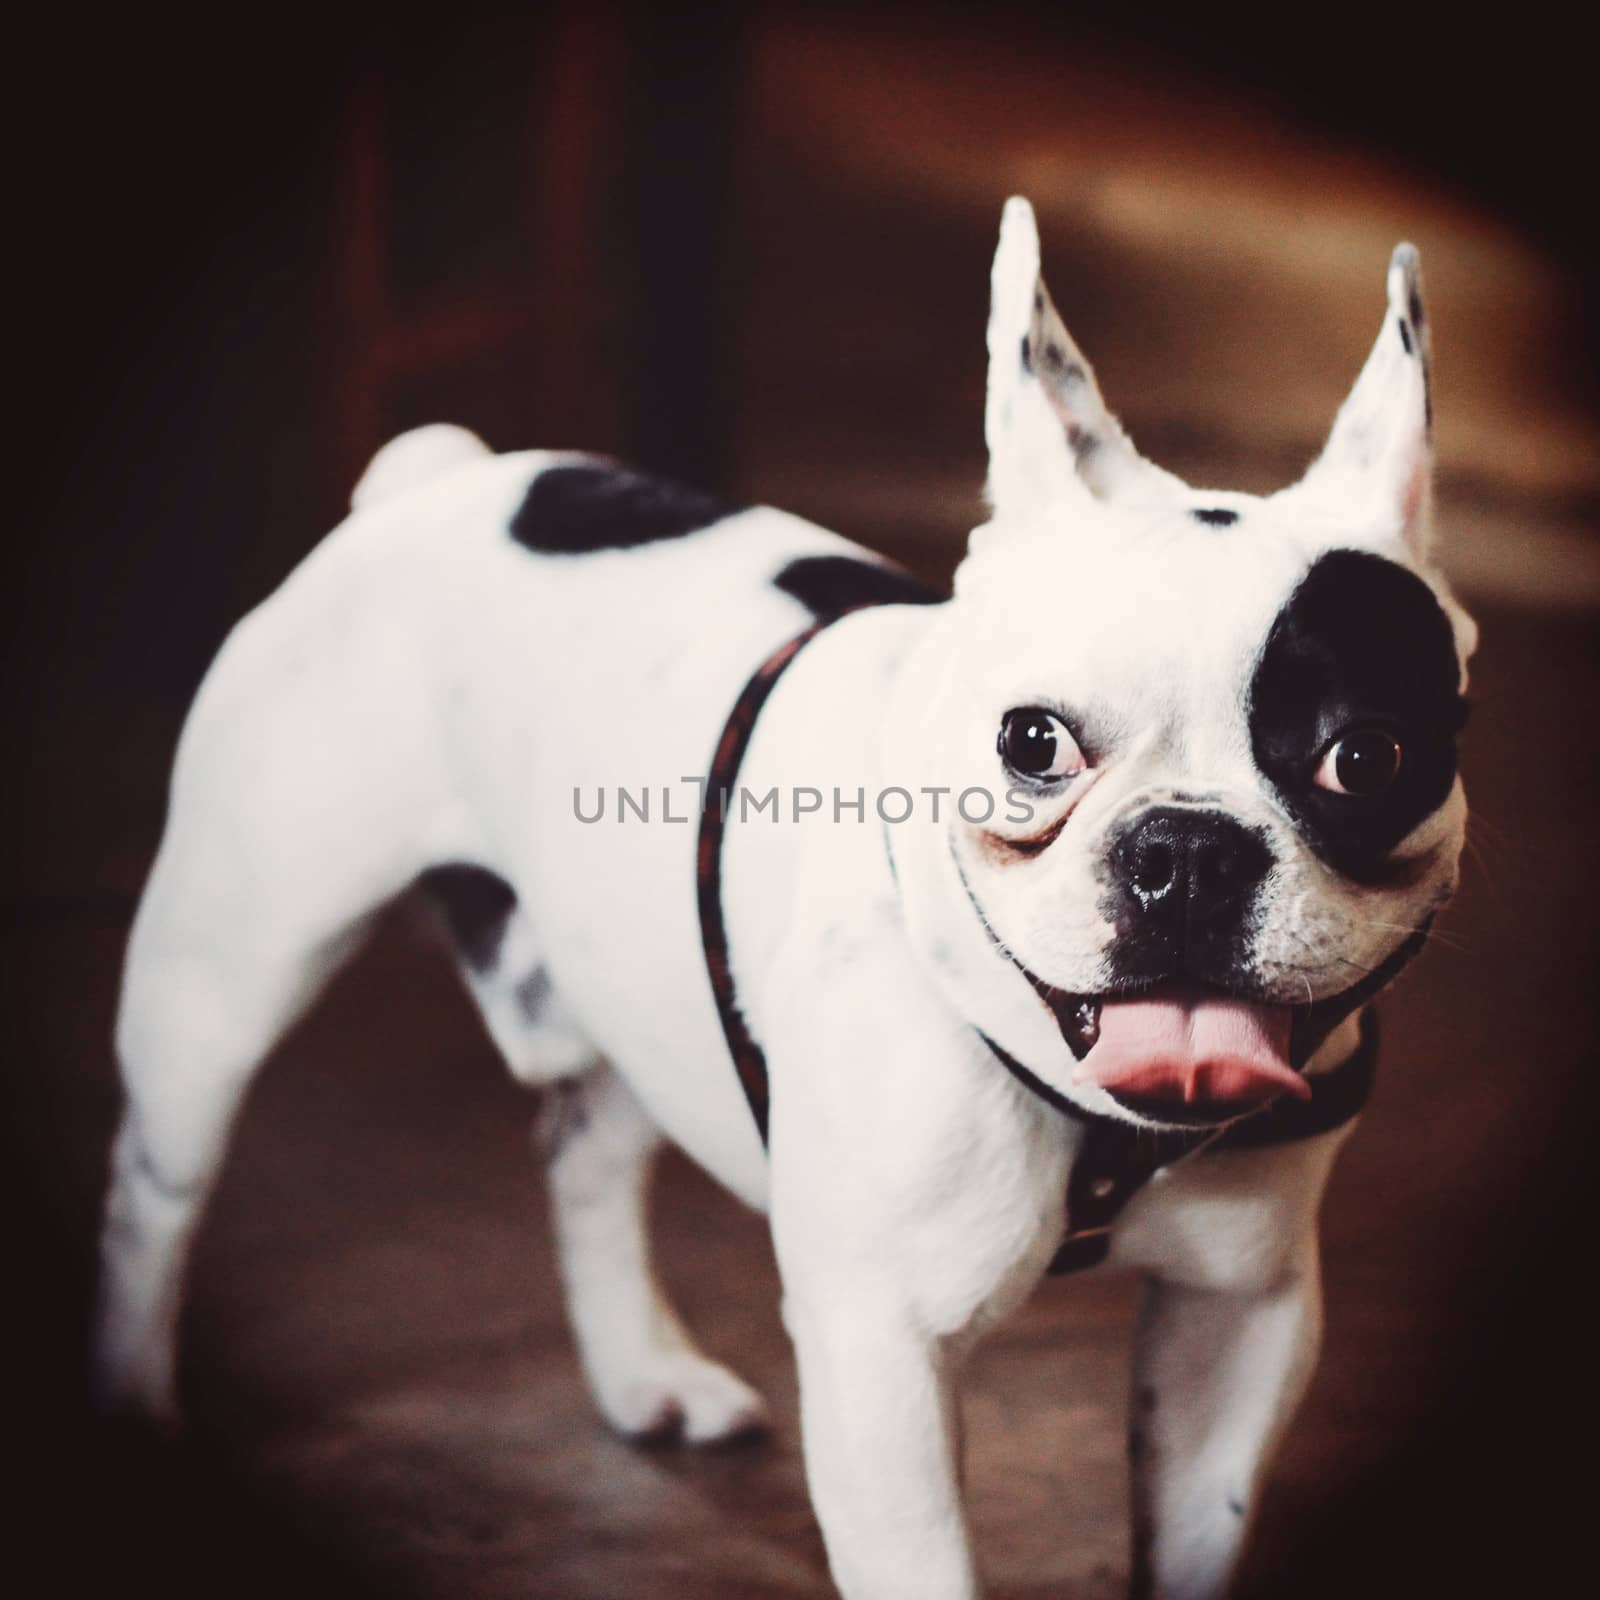 Cute bulldog with retro filter effect by nuchylee